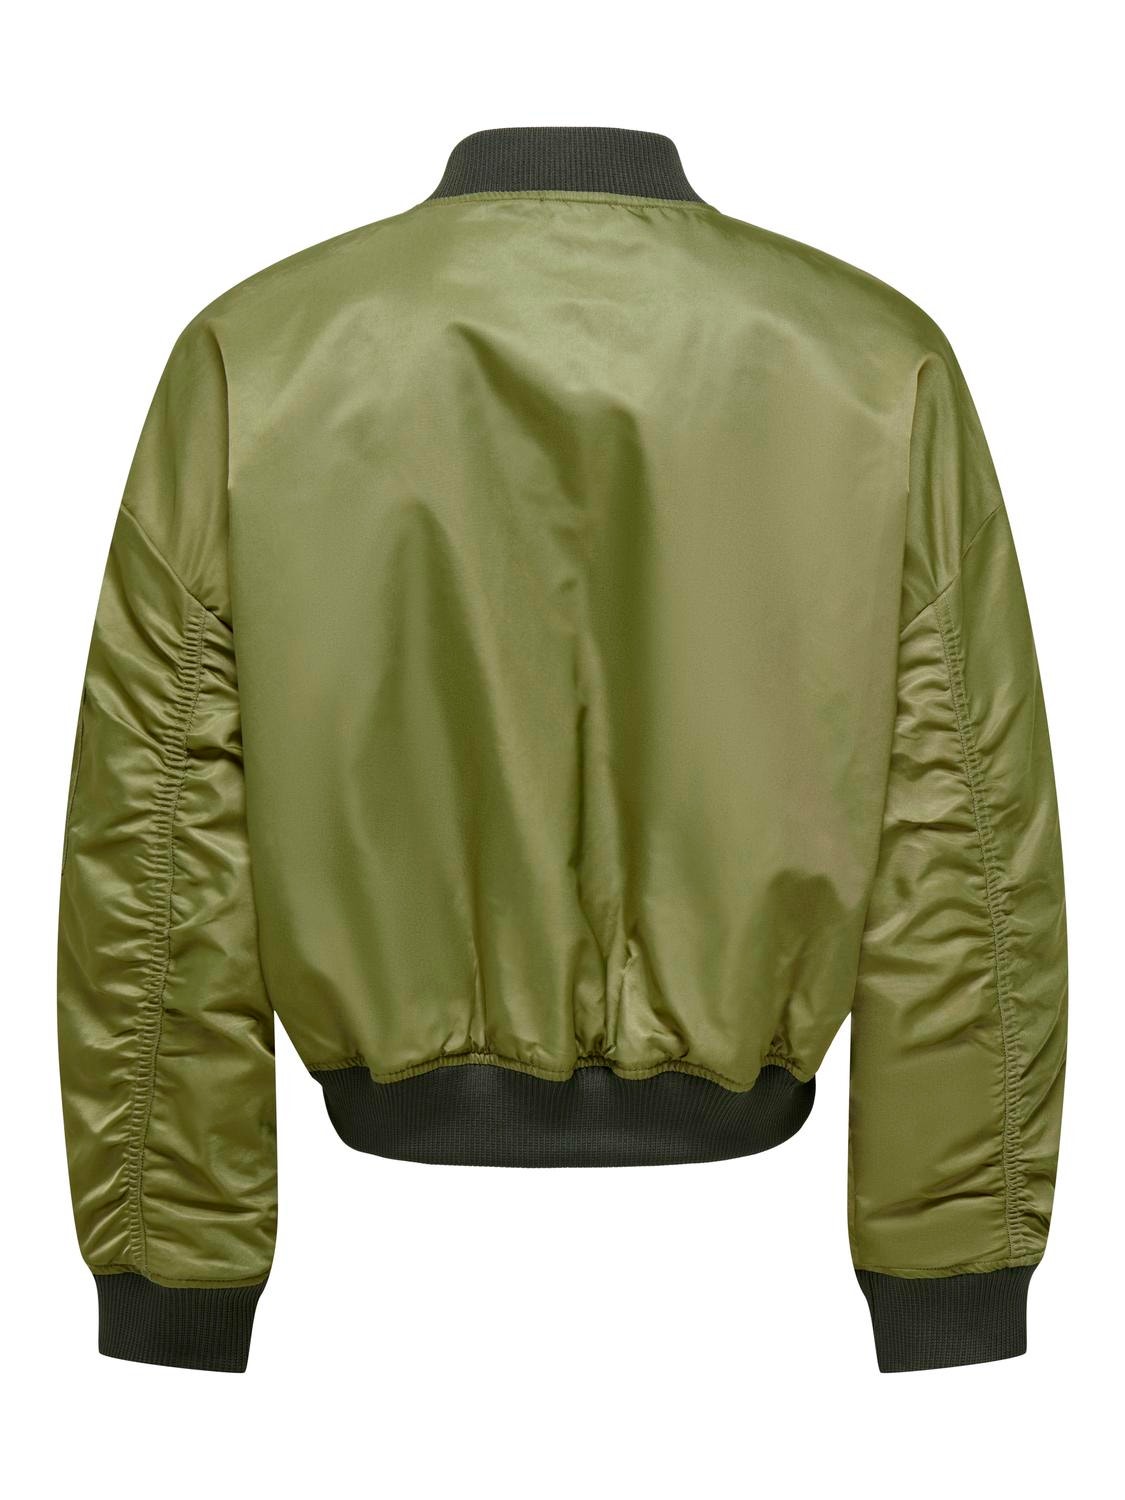 ONLY Short bomber jacket -Dried Herb - 15308545